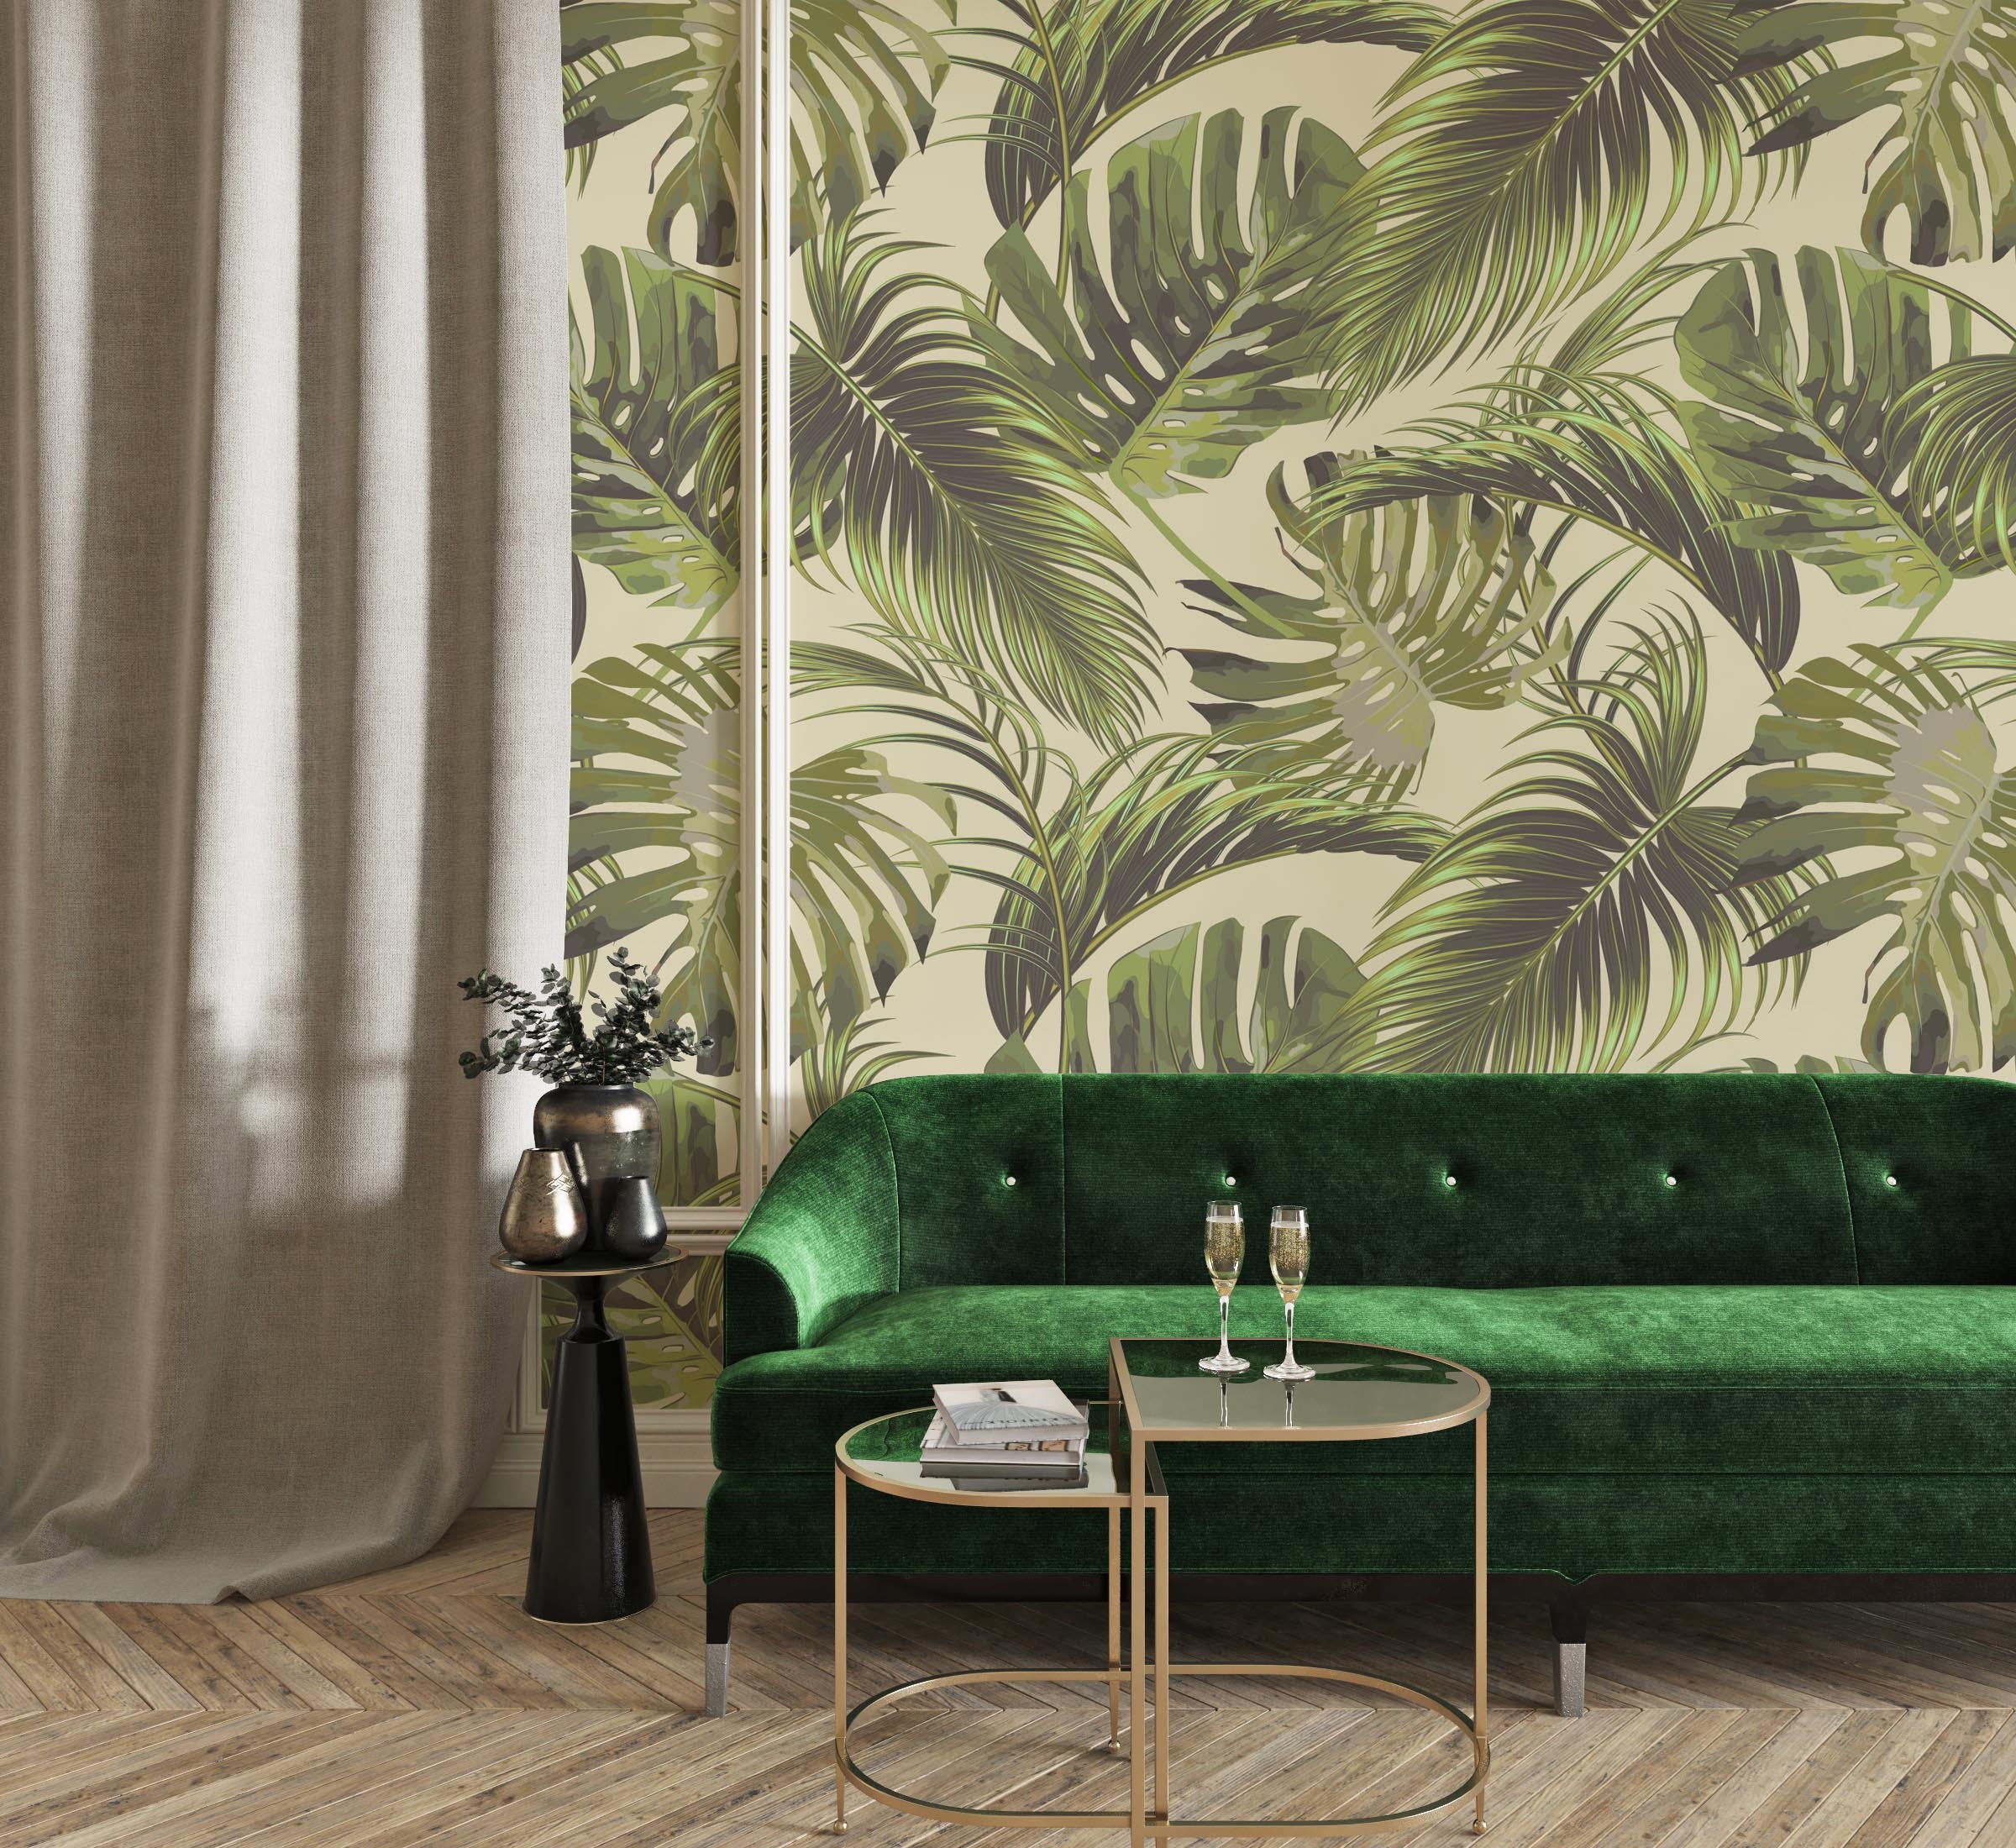 Tropical Palm Leaves Forest Leaf Modern Wallpaper Self Adhesive Peel and Stick Wall Sticker Wall Decoration Removable